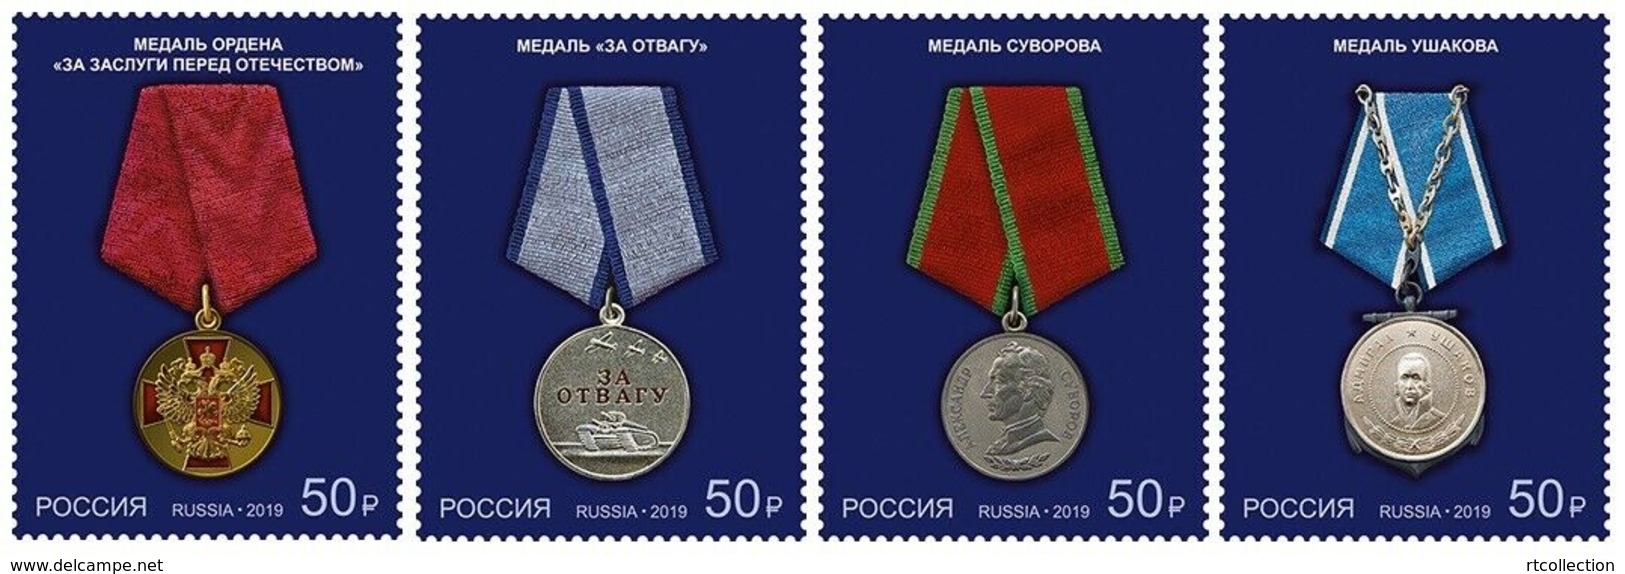 Russia 2019 - Set Of State Awards Of The Russian Federation Symbol Coat Of Arms Heraldry Organizations Stamps MNH - Stamps